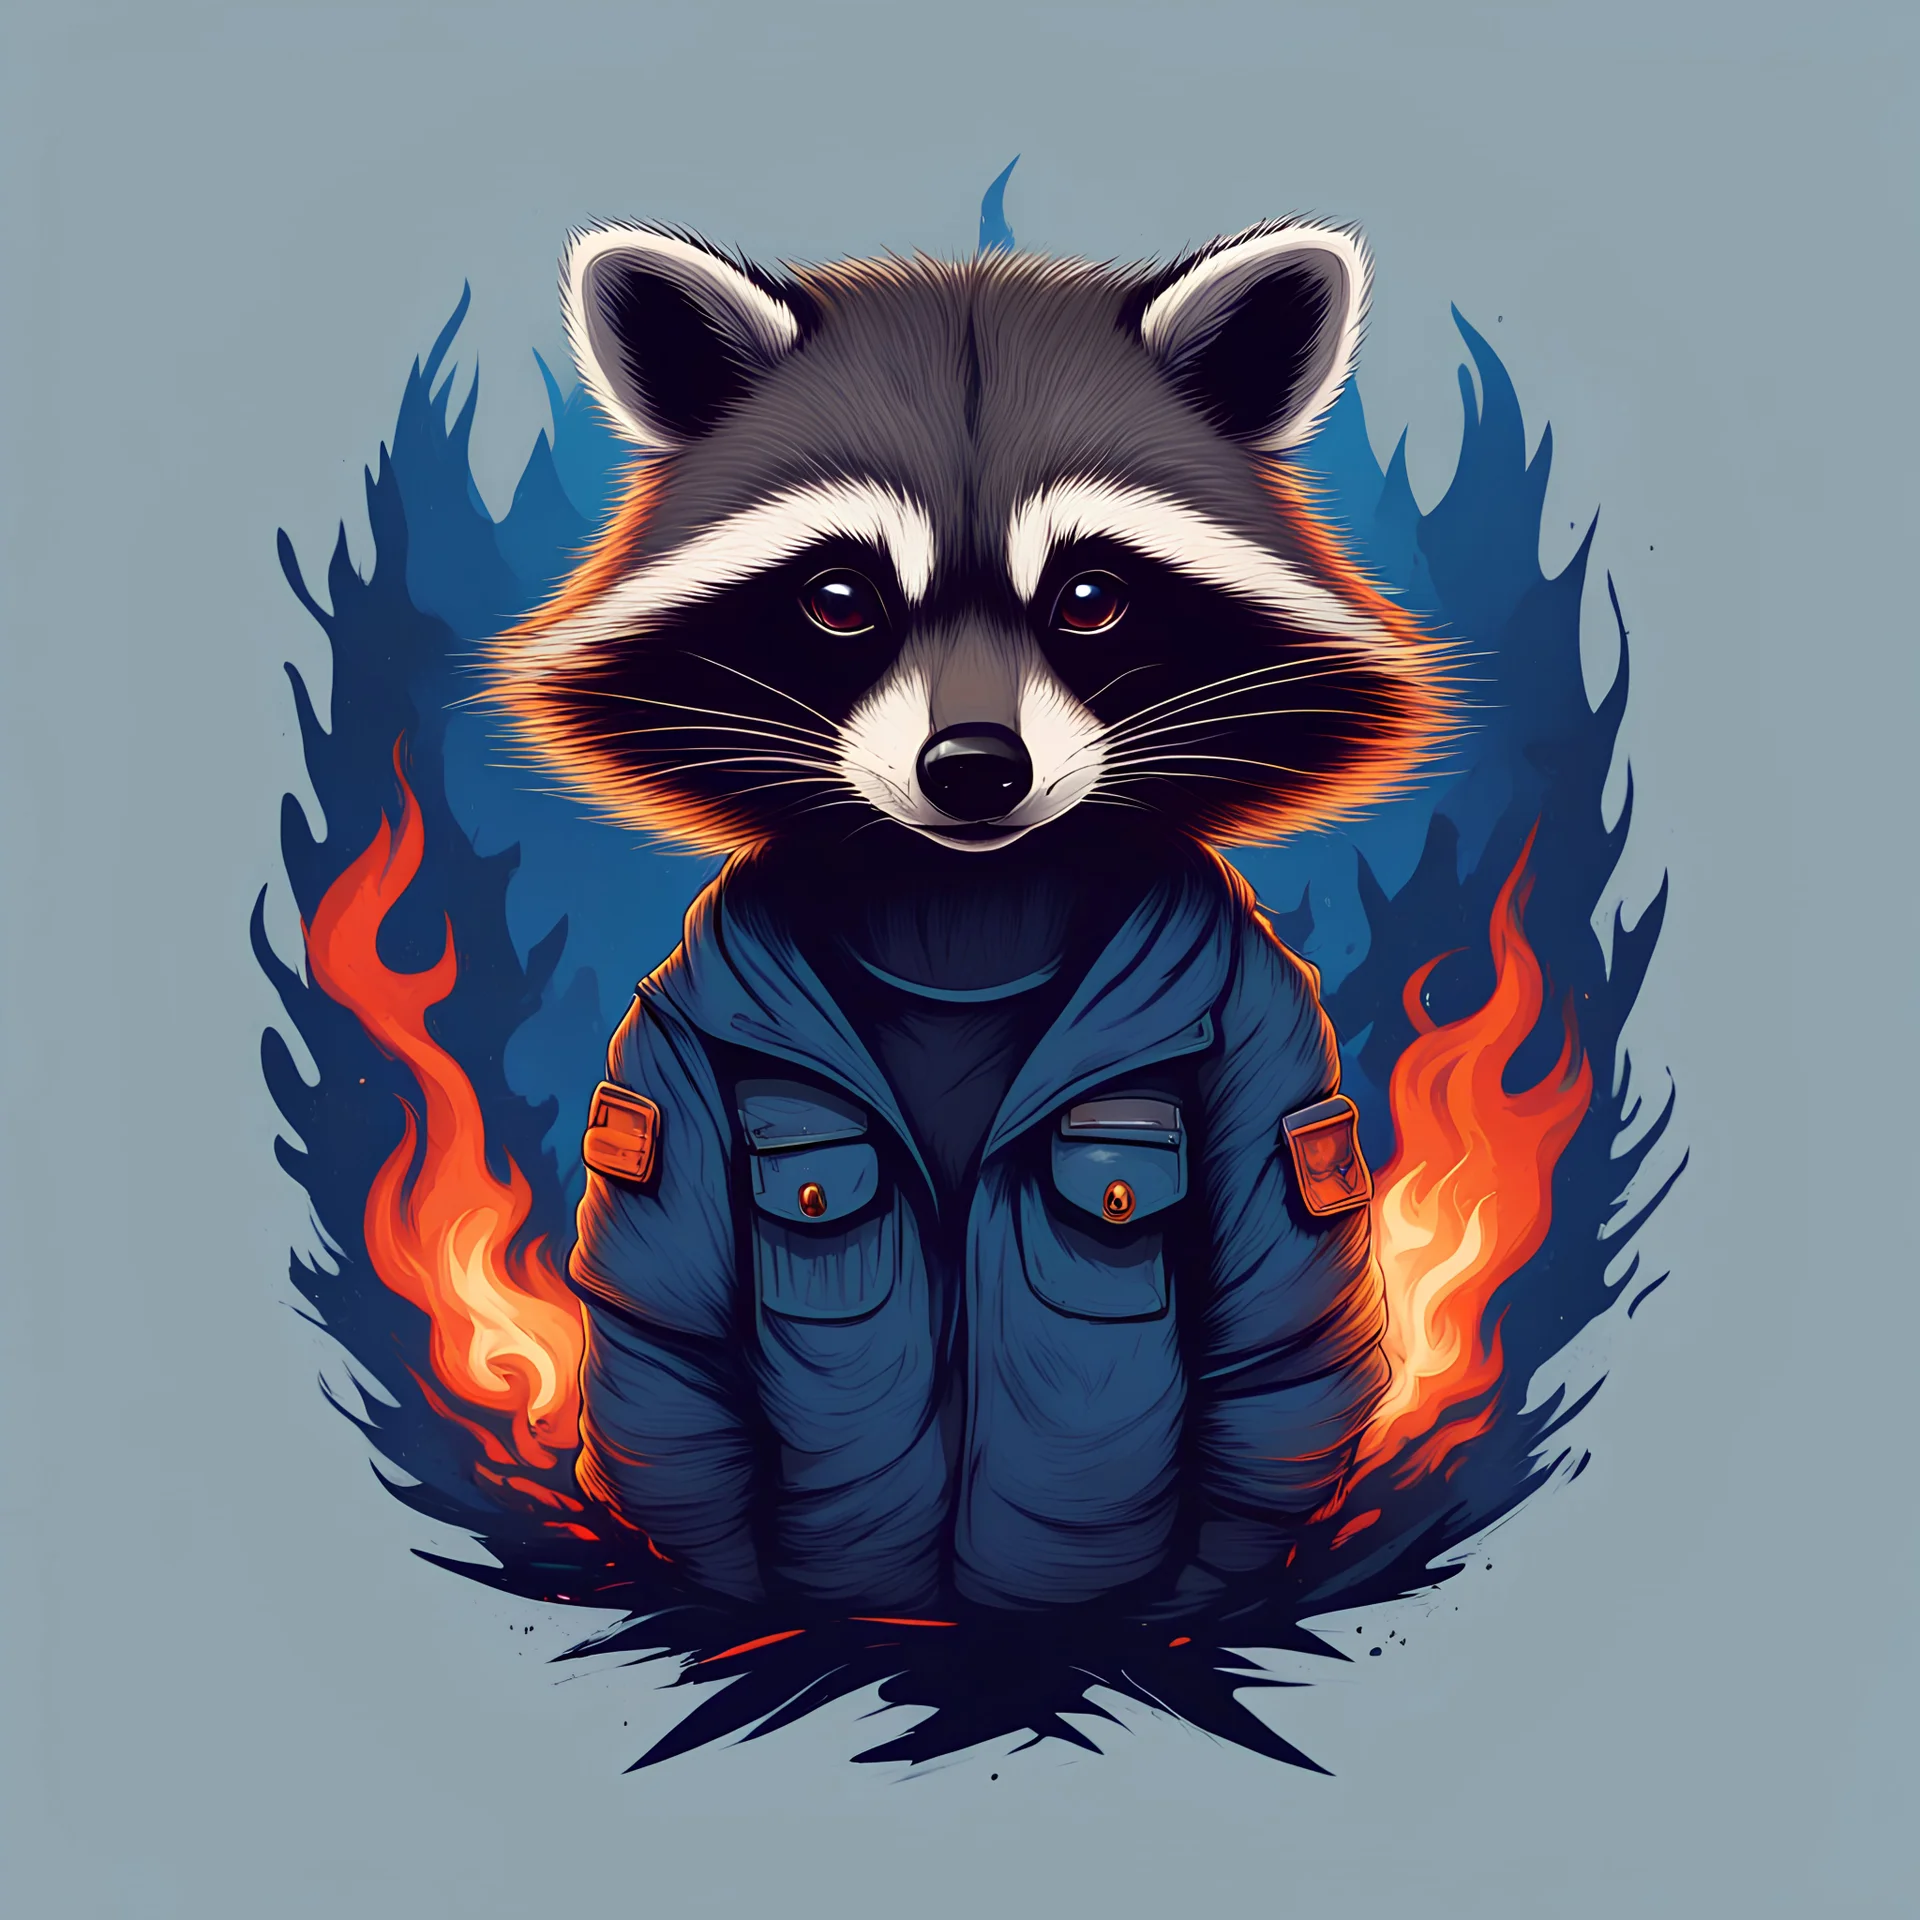 Raccoon, burning in hell, in army, blue fire, most realistic, atmospheric, hesh, retro style, t-shirt design, detailed character, minimalist background, logotip